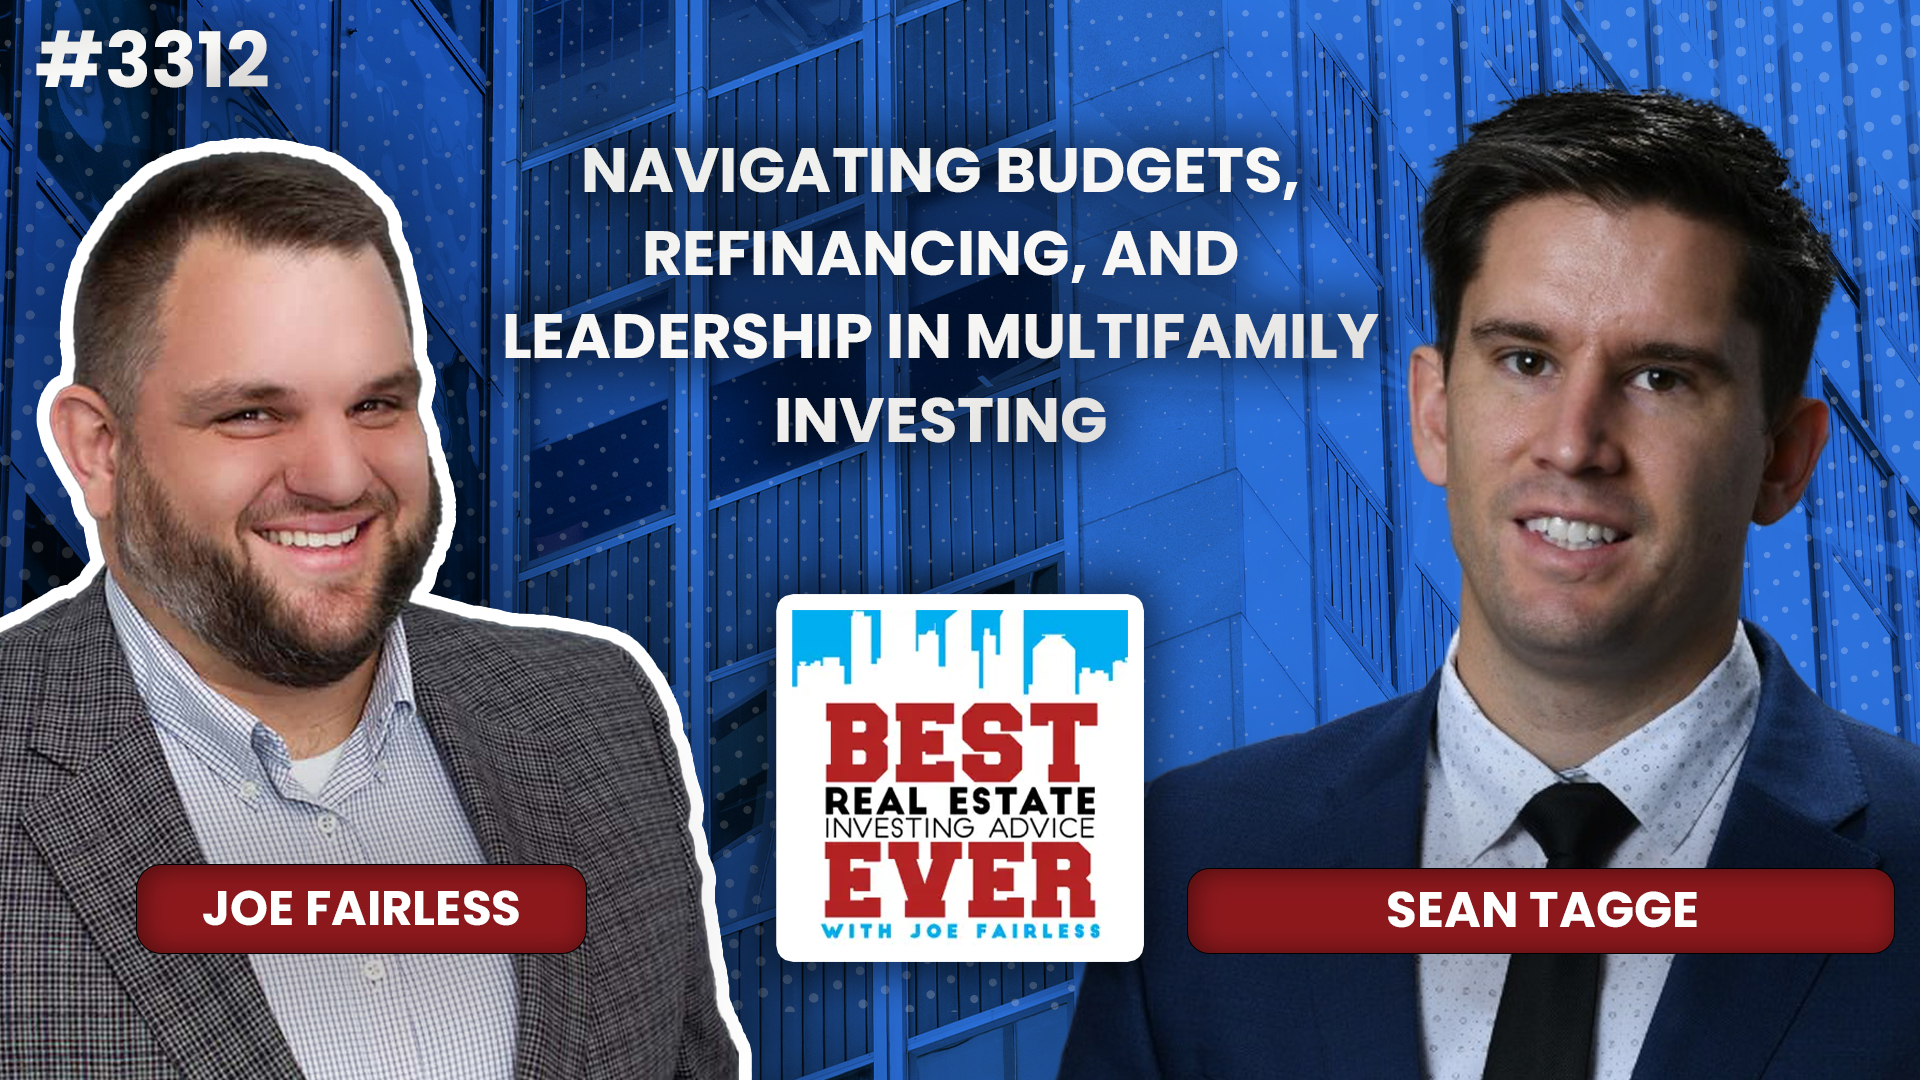 JF3312: Sean Tagge - Navigating Budgets, Refinancing, and Leadership in Multifamily Investing